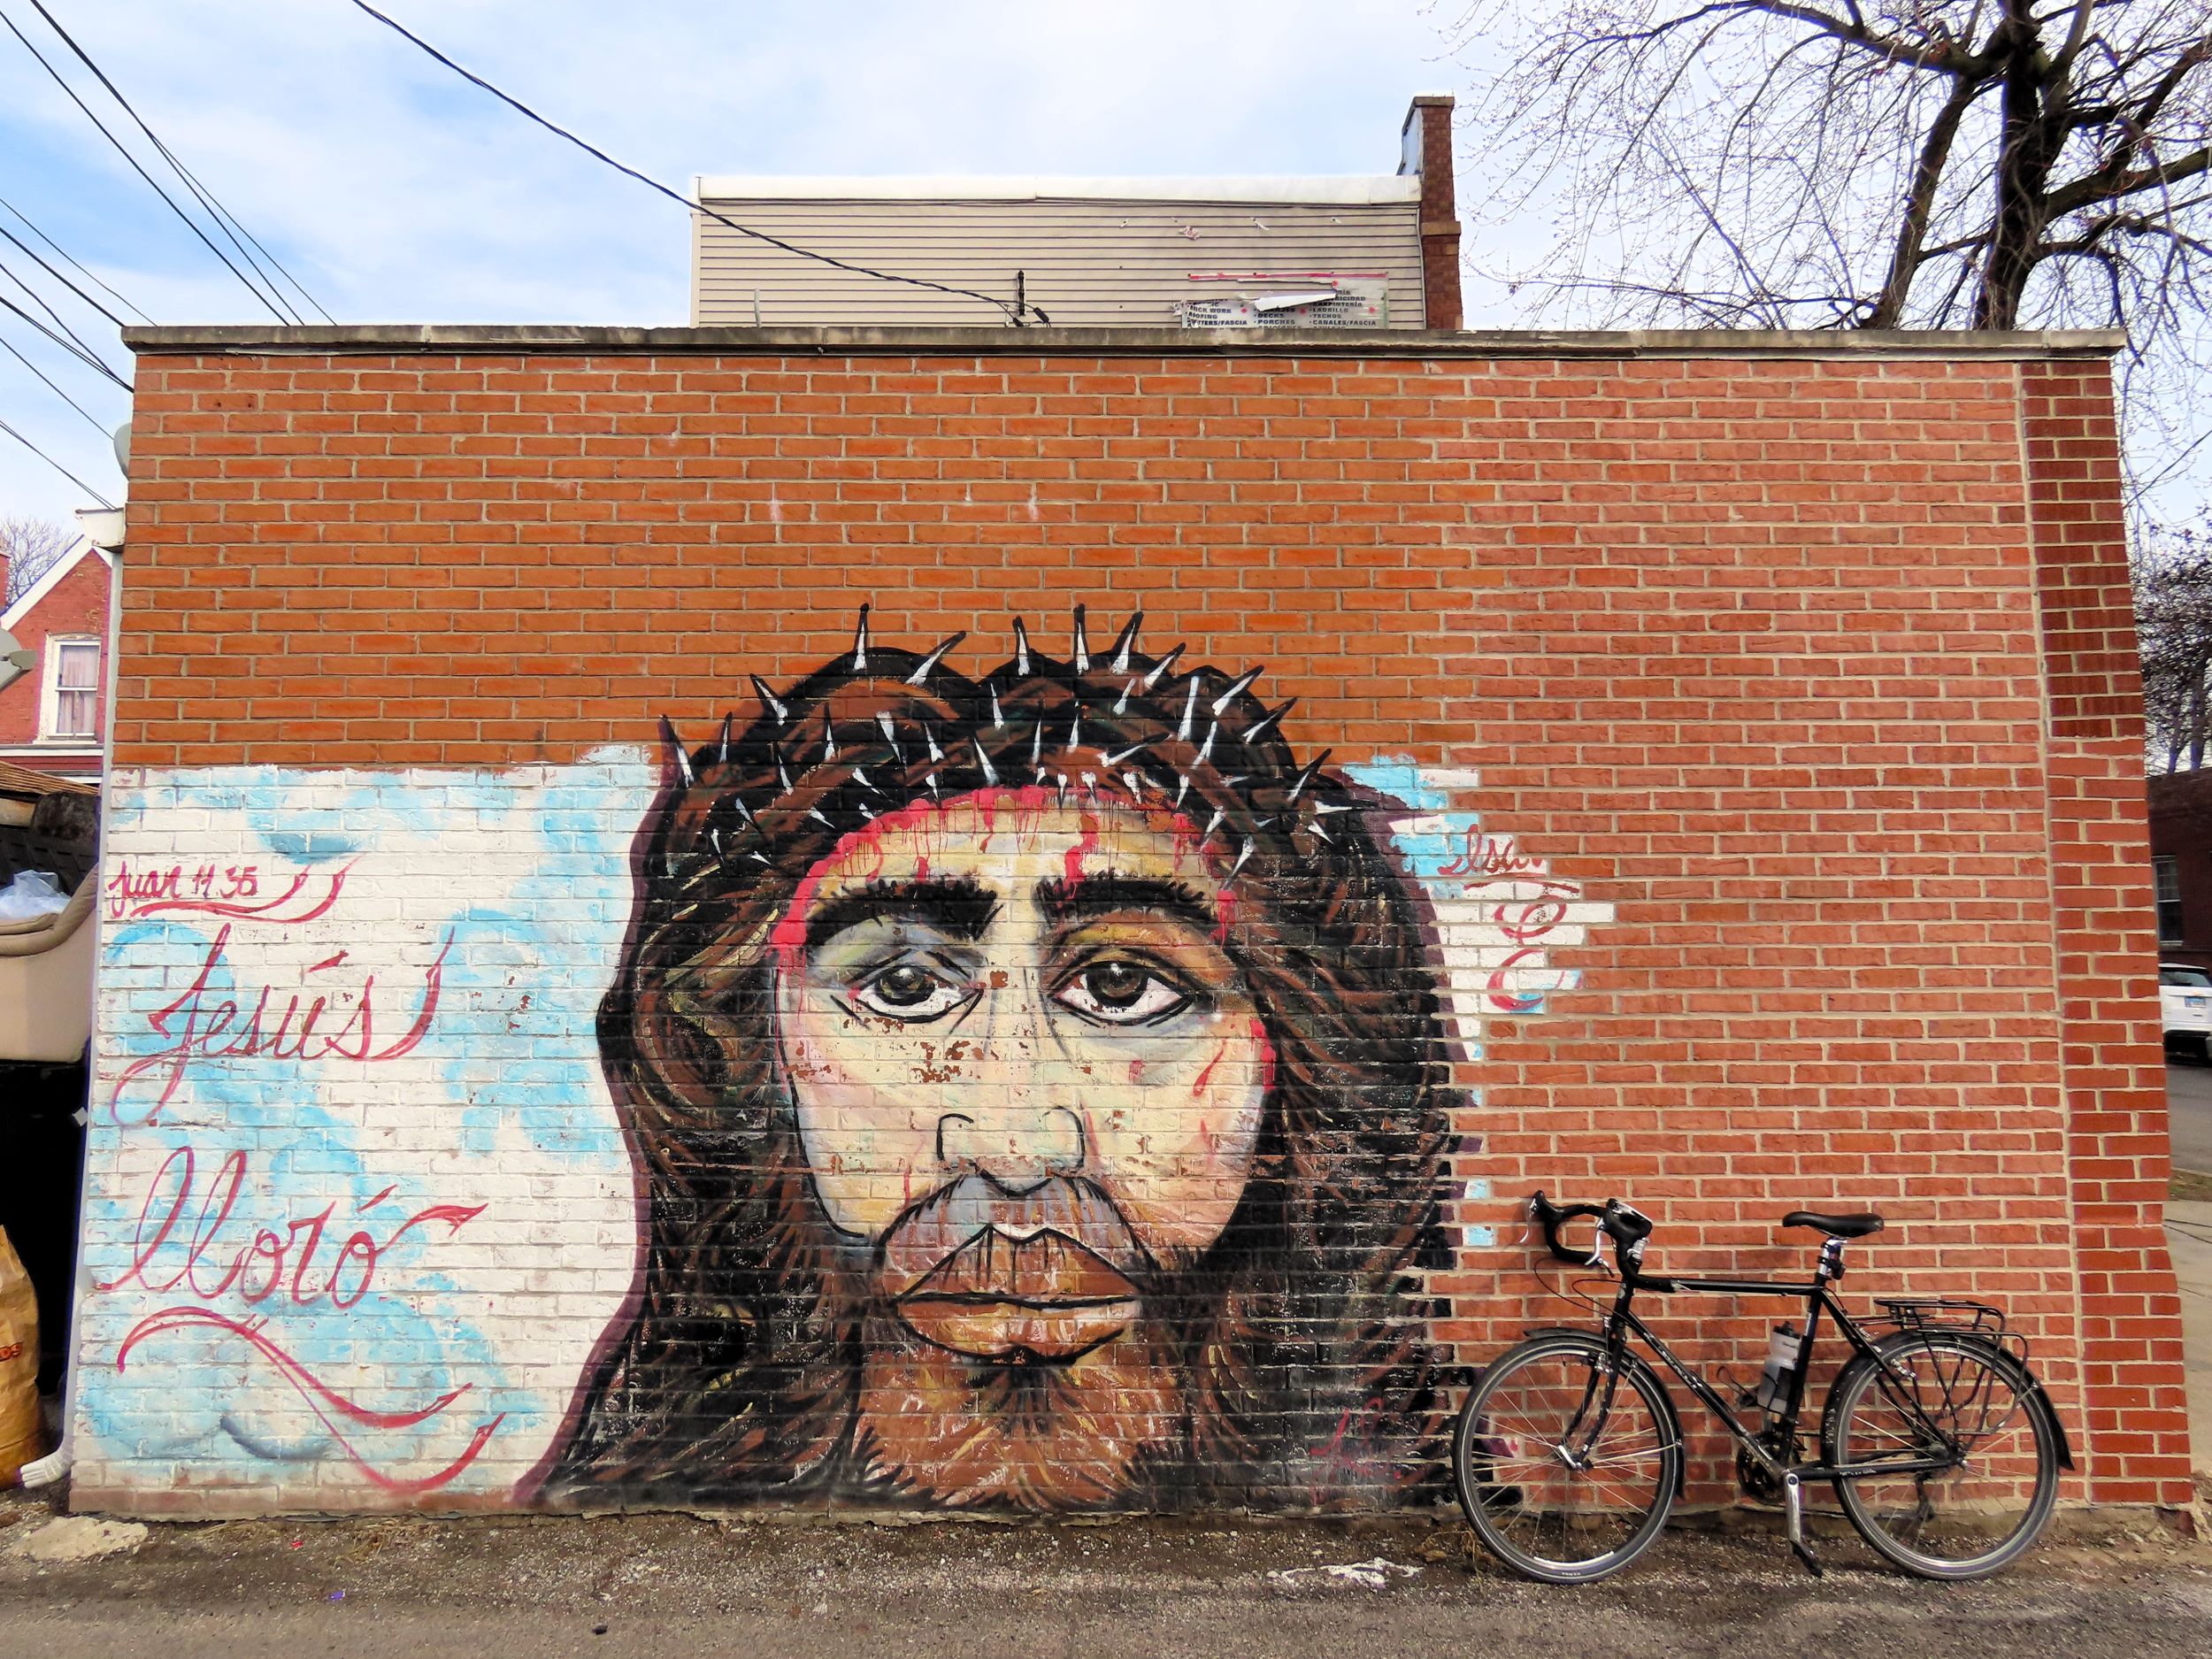 A tour bicycle leaning at right on a restored brick wall with a mural of Jesus remaining on the older part
